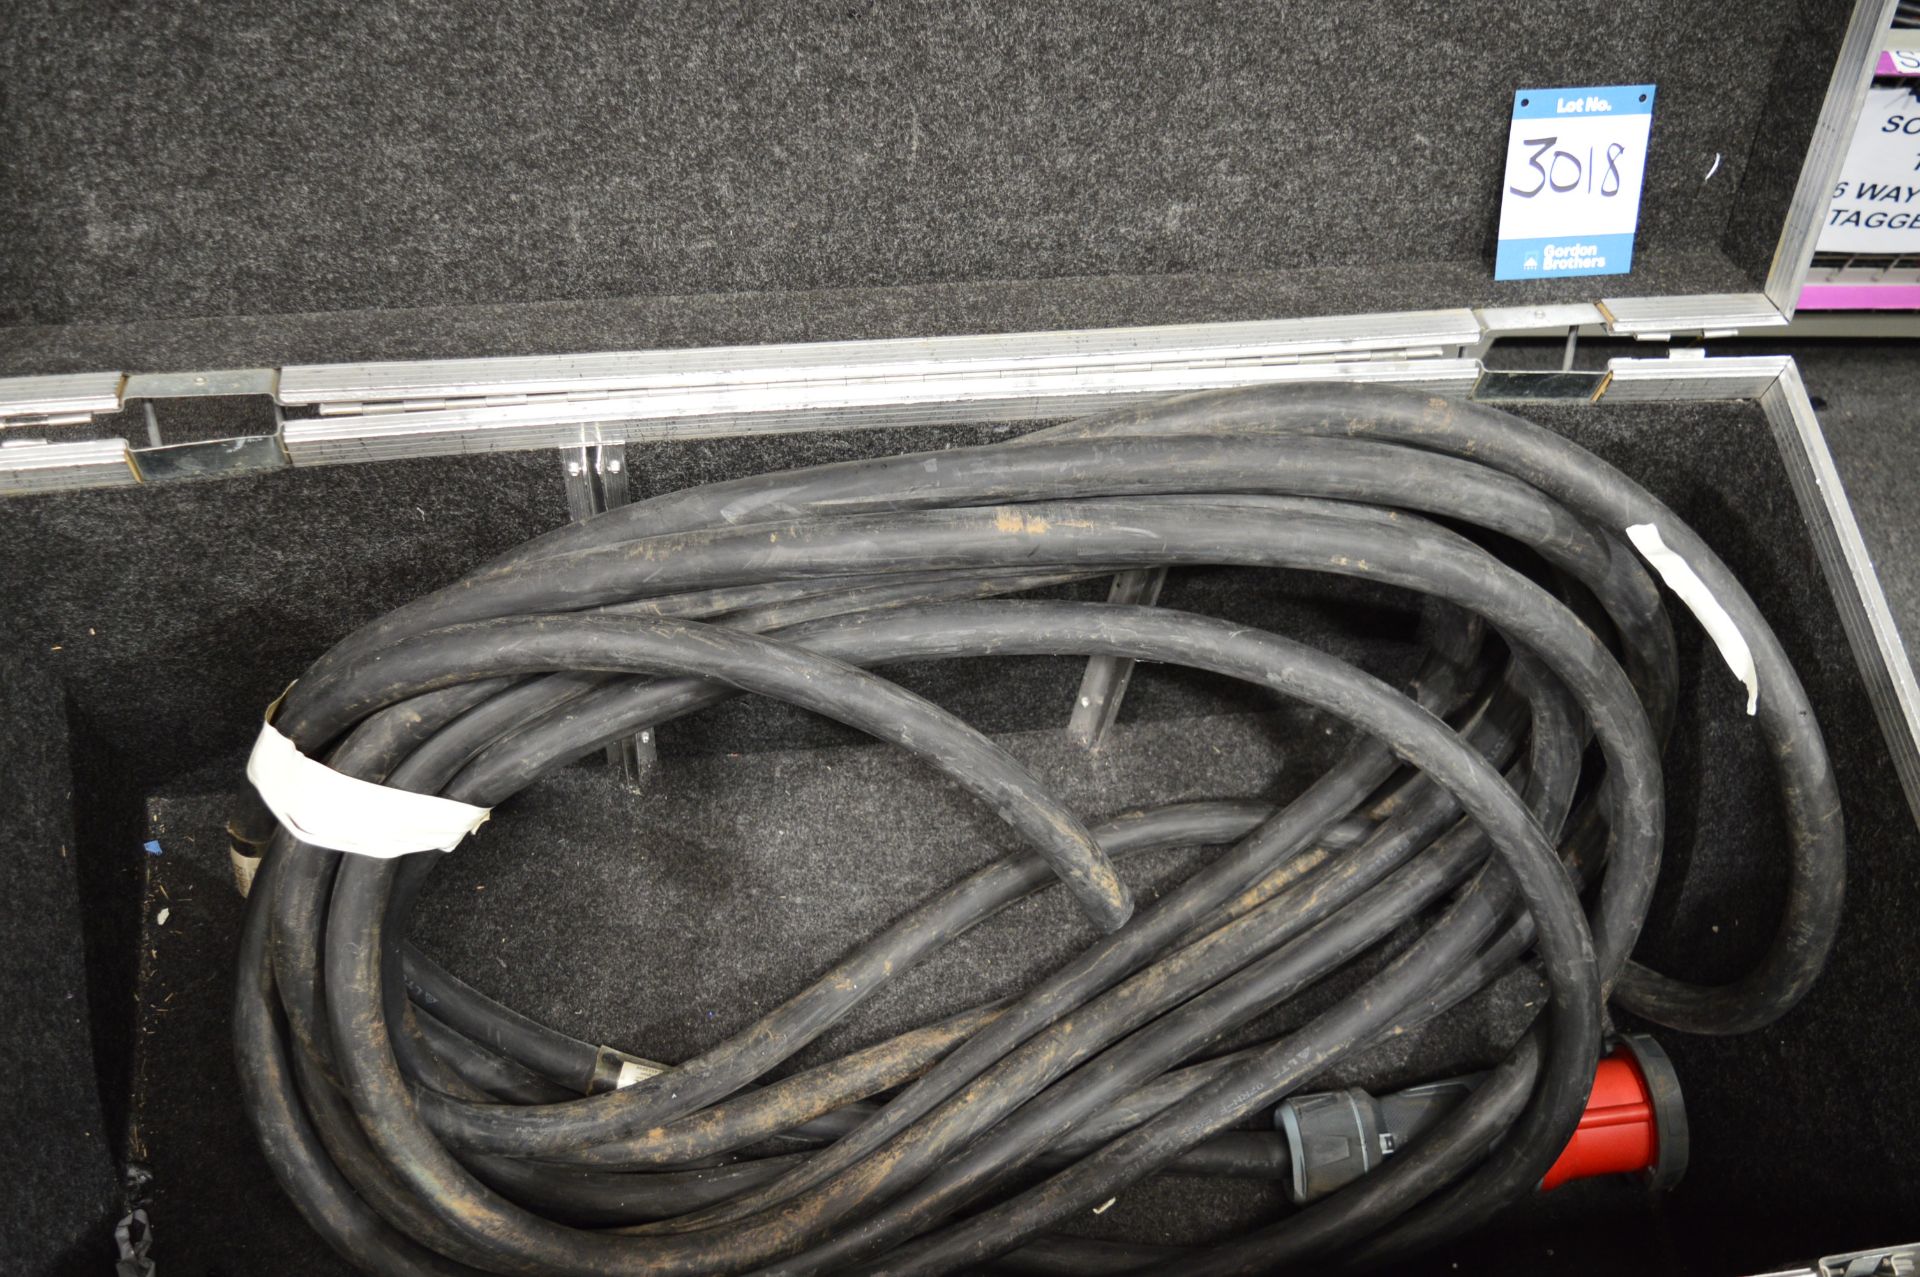 125amp three phase approx. 20m cable (1x end cut, no socket) in flight case: Unit 500, Eckersall